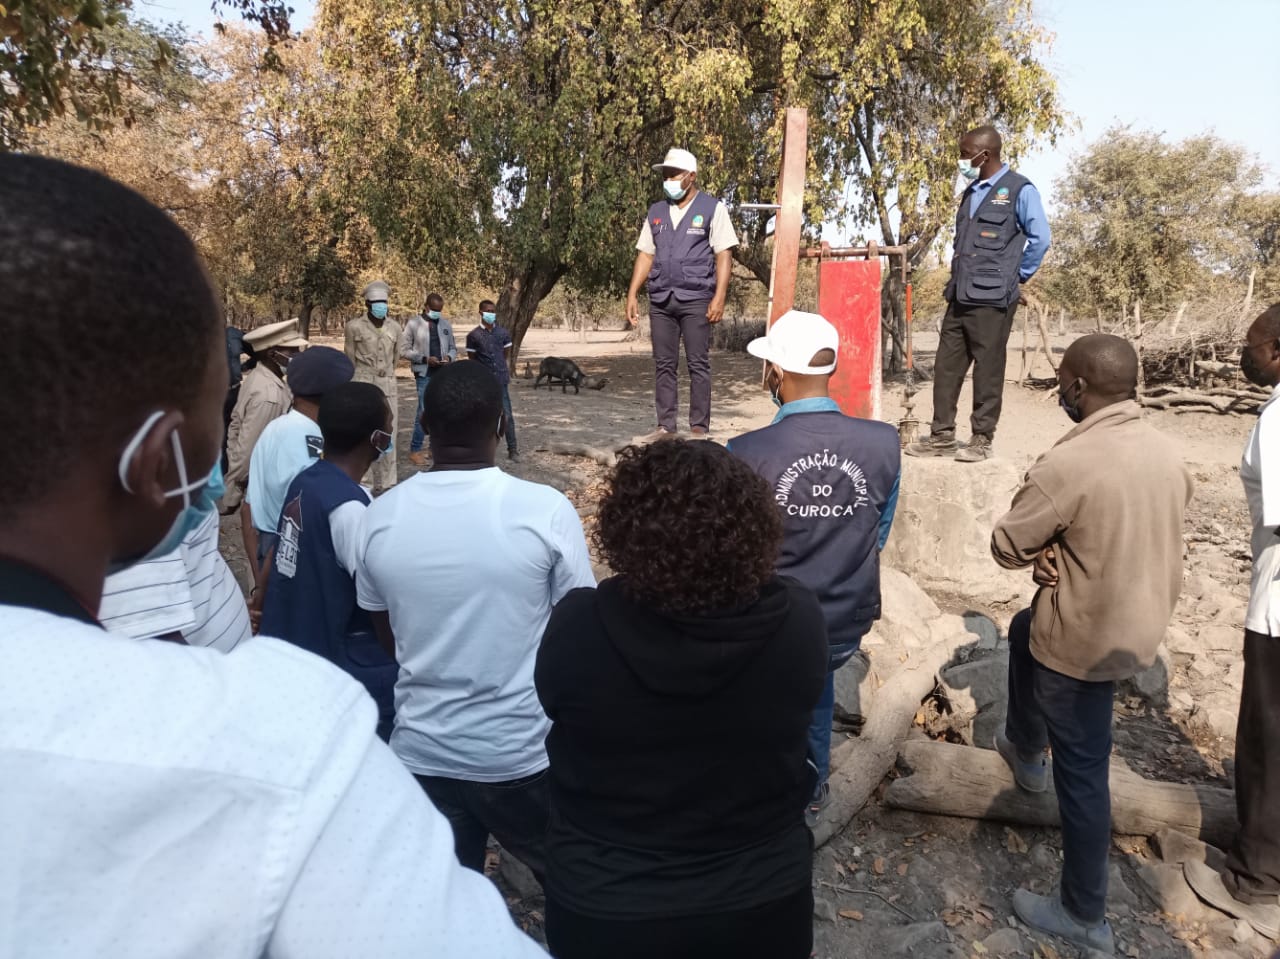 On the 17th of September, the Municipal Administration of Curoca made several visits to the water sources in the village of Chipa. The Municipal Administrator expressed solidarity with the community that has suffered a lot from the drought, and along with the project, actions were identified that could mitigate the situation.